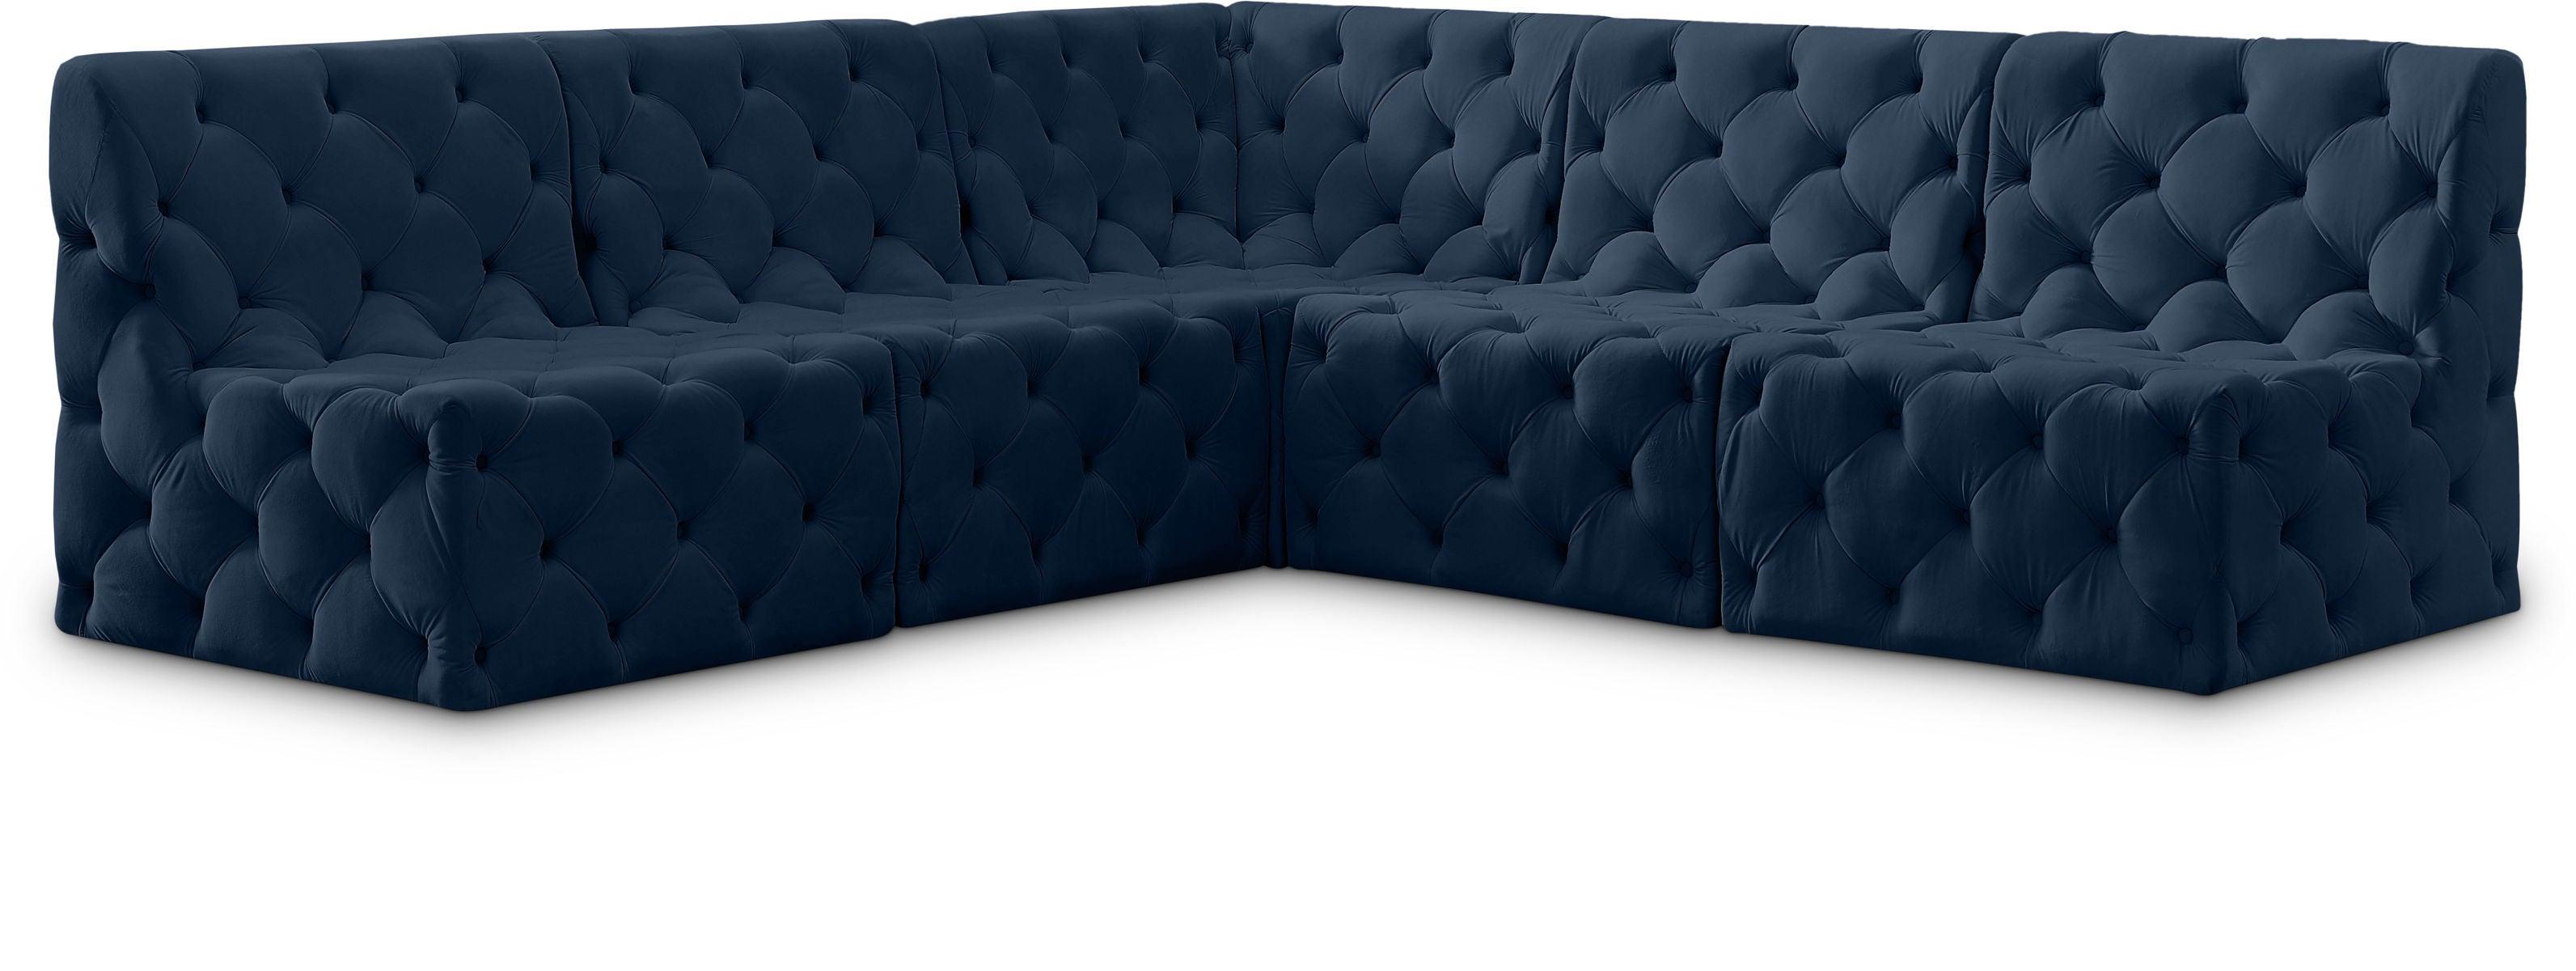 Meridian Furniture - Tuft - Modular Sectional 5 Piece - Navy - Modern & Contemporary - 5th Avenue Furniture